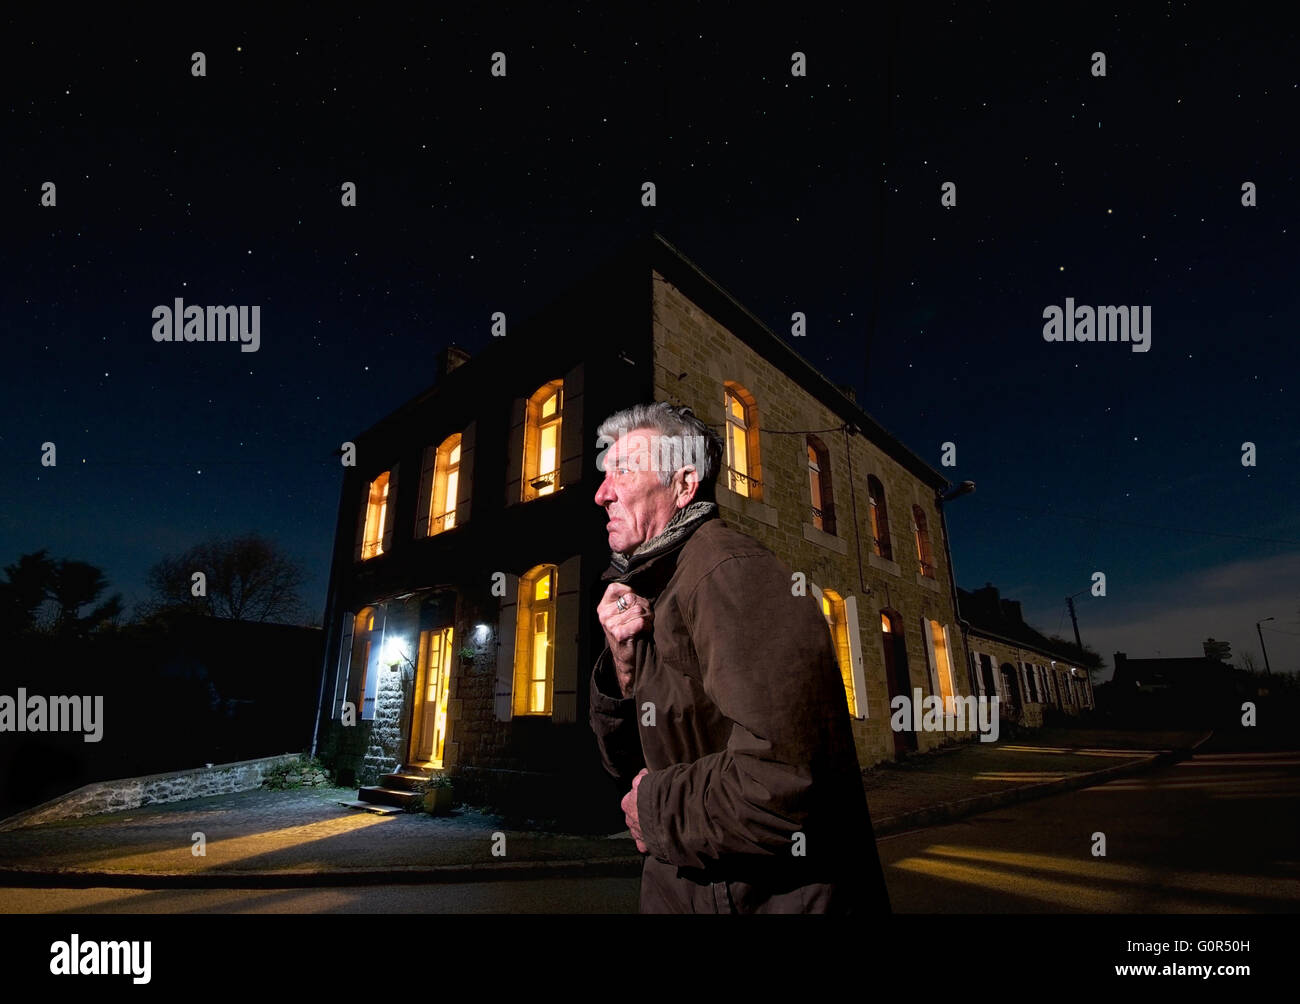 Grumpy old man in a street on a cold winter night Stock Photo